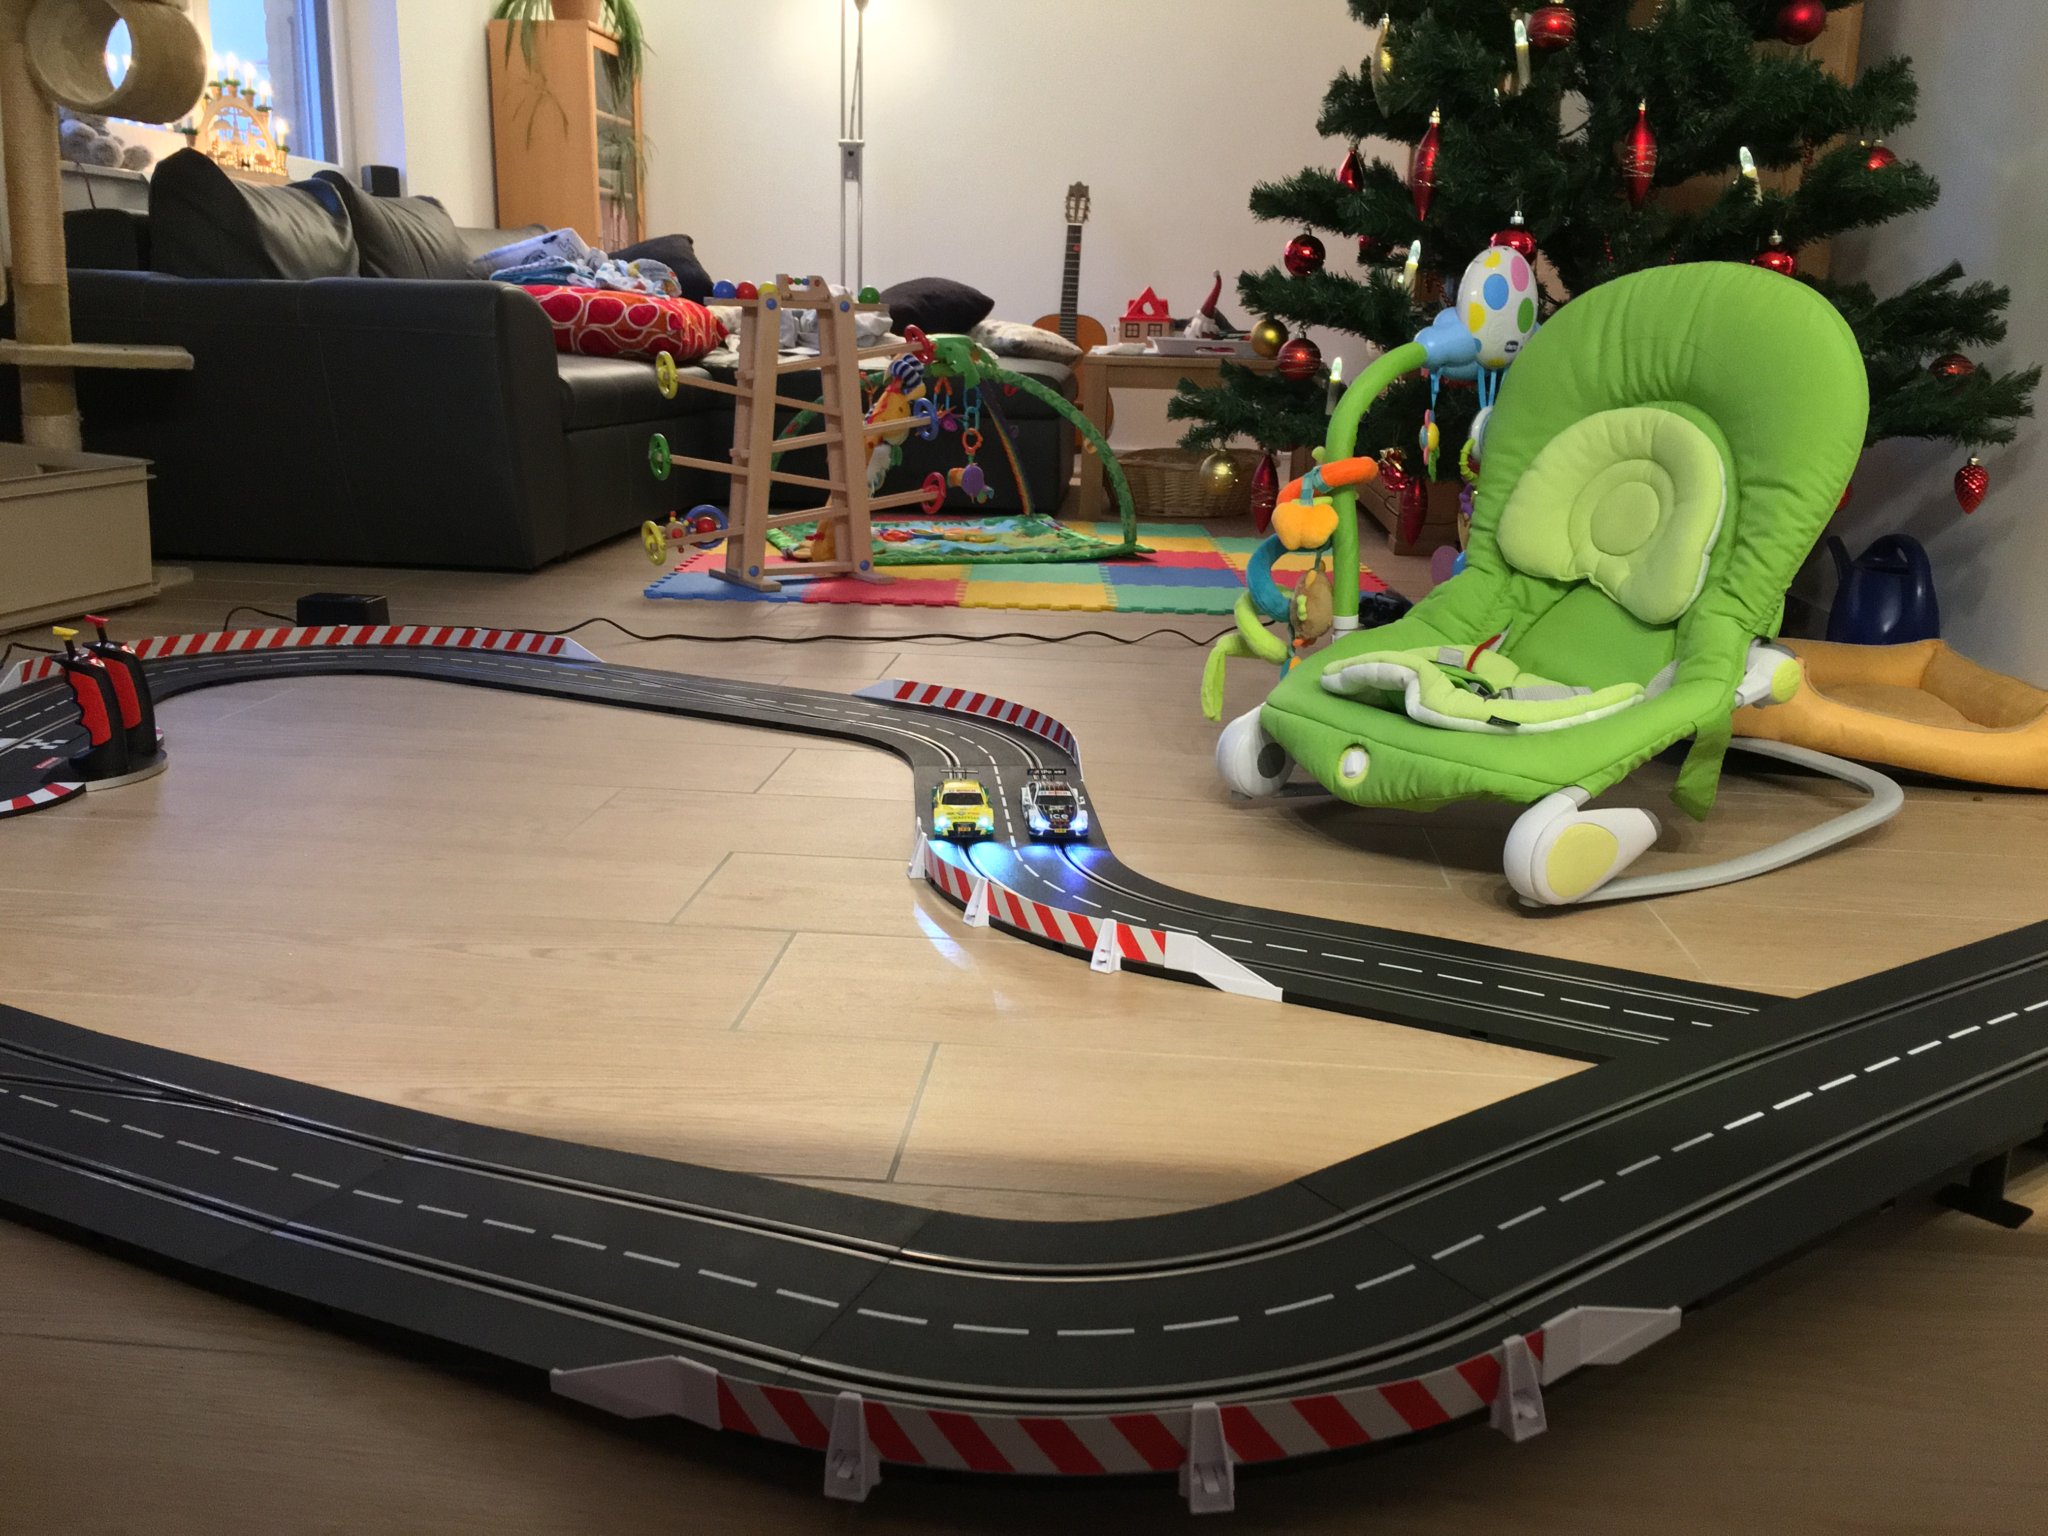 Carrera Slot Car Tracks Reviewed: The Best Slot Car Set For Kids | That Toy  Dad